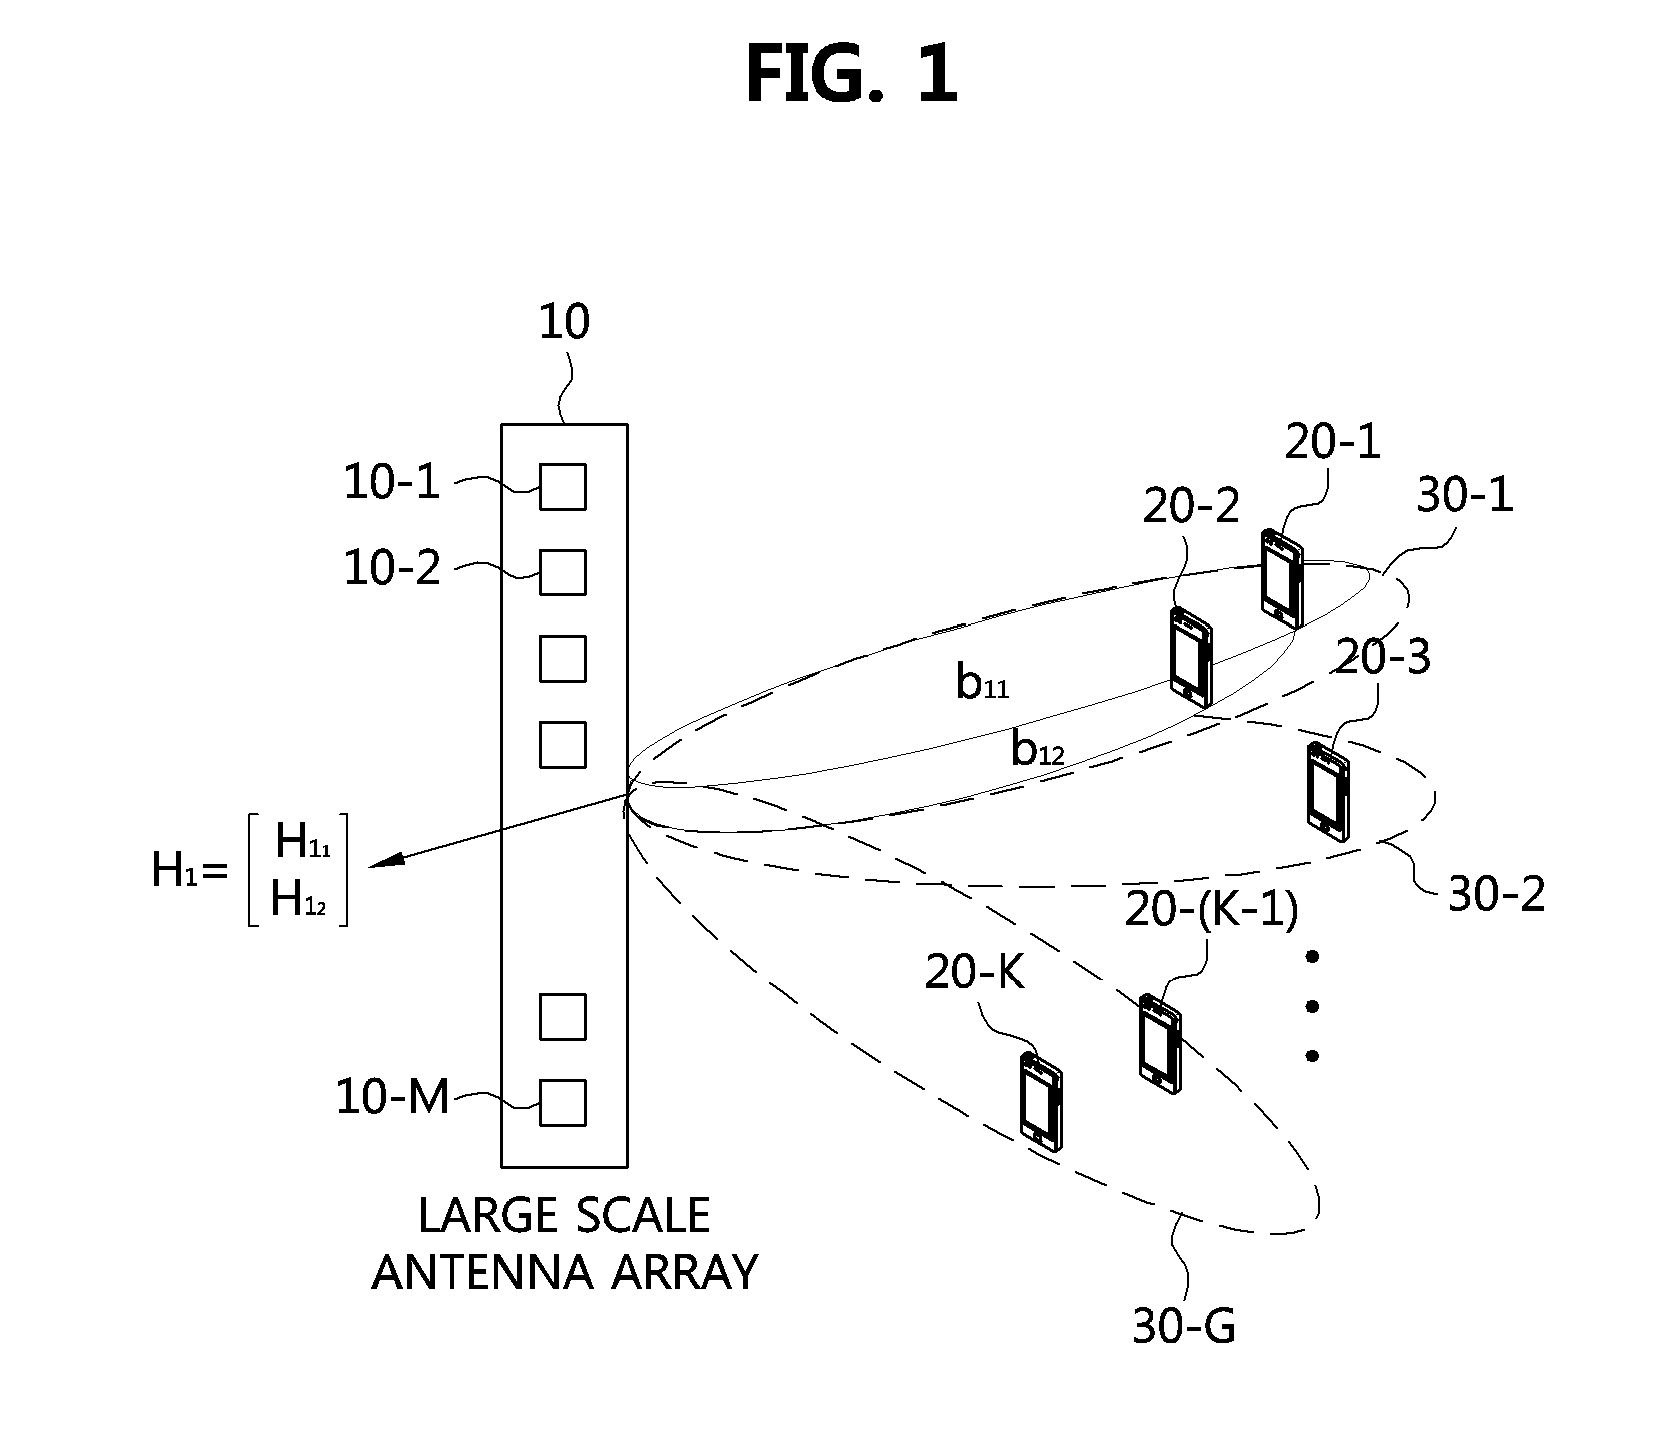 Method for multi-input multi-output communication in large-scale antenna system